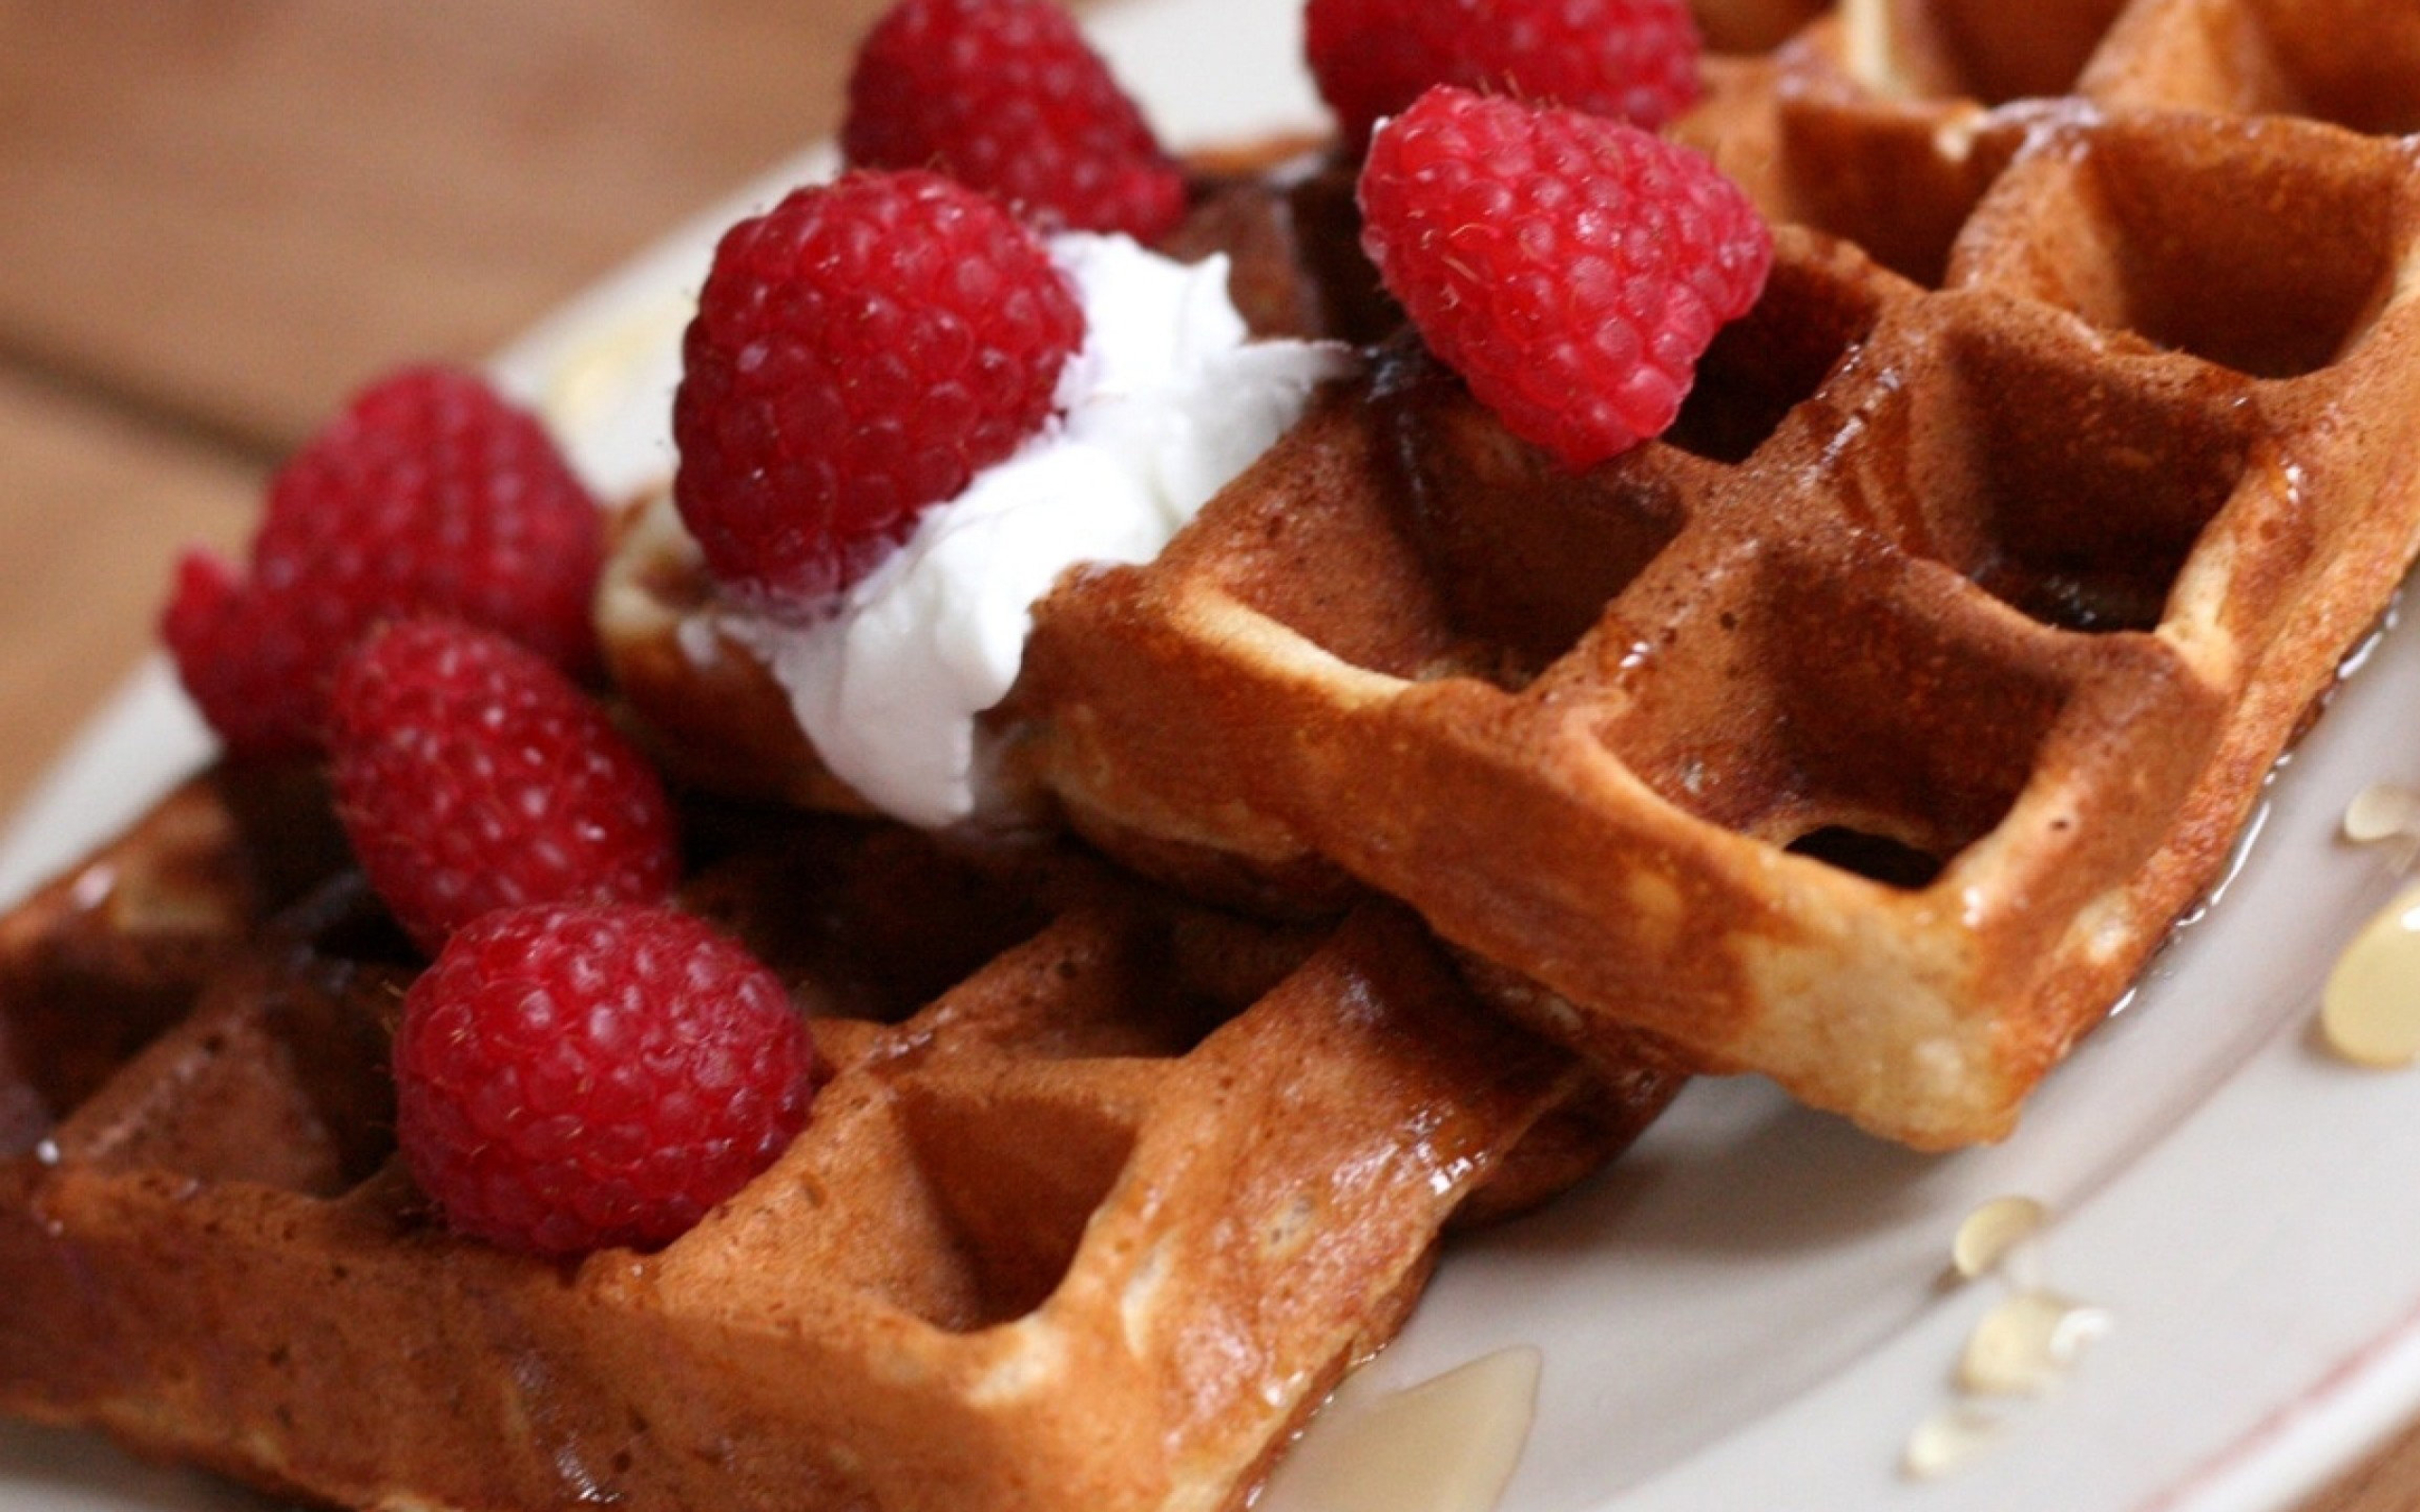 Waffle: Battercake, made by mixing a runny batter and pressing it in a specially designed iron. 2560x1600 HD Background.